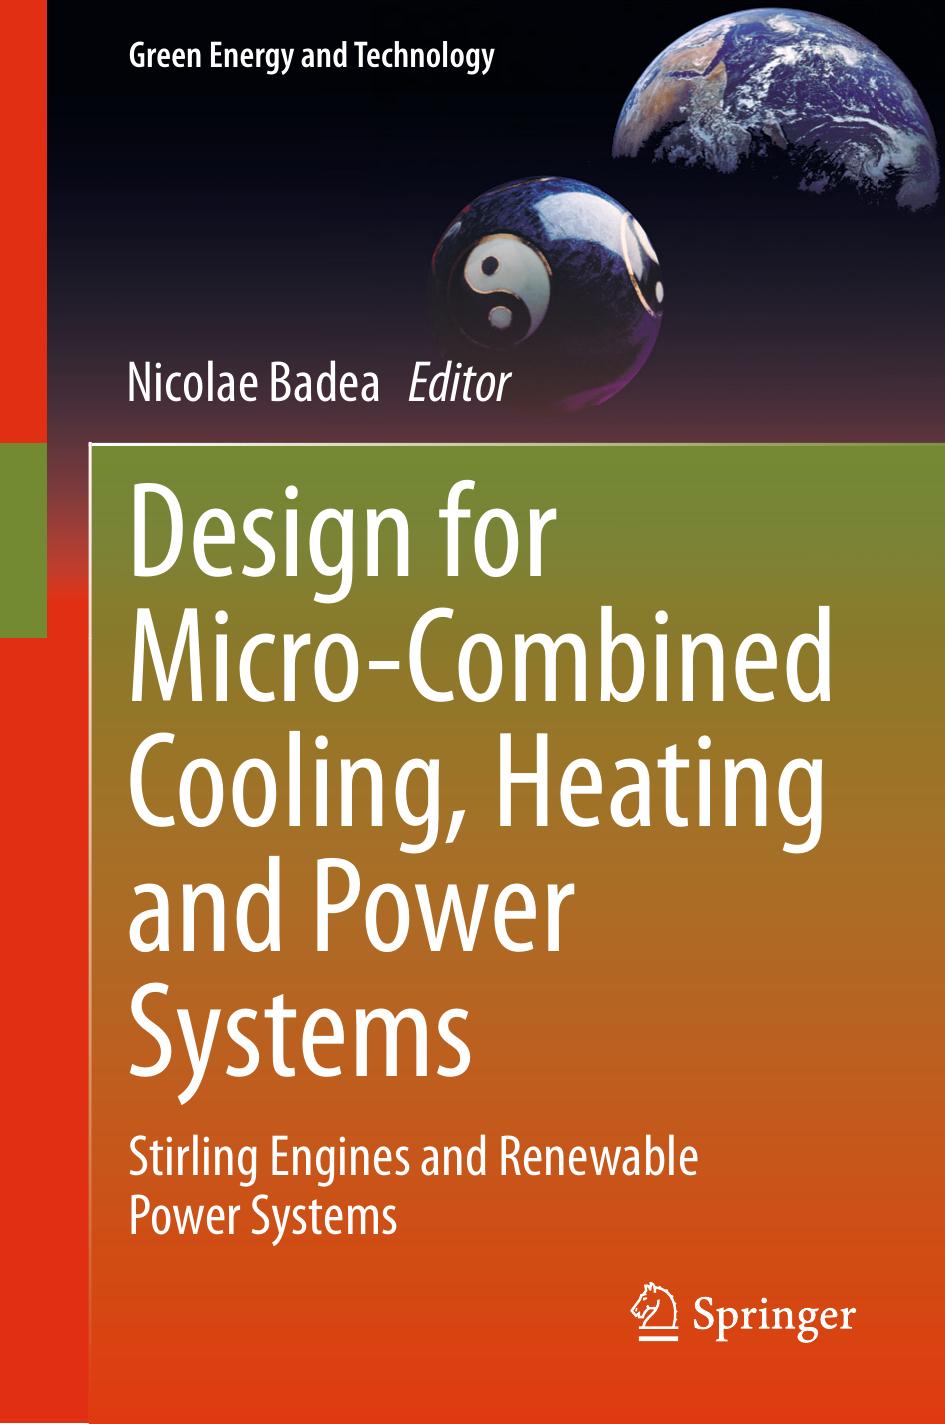 Design for Micro-Combined Cooling, Heating and Power Systems (2015) by Unknown